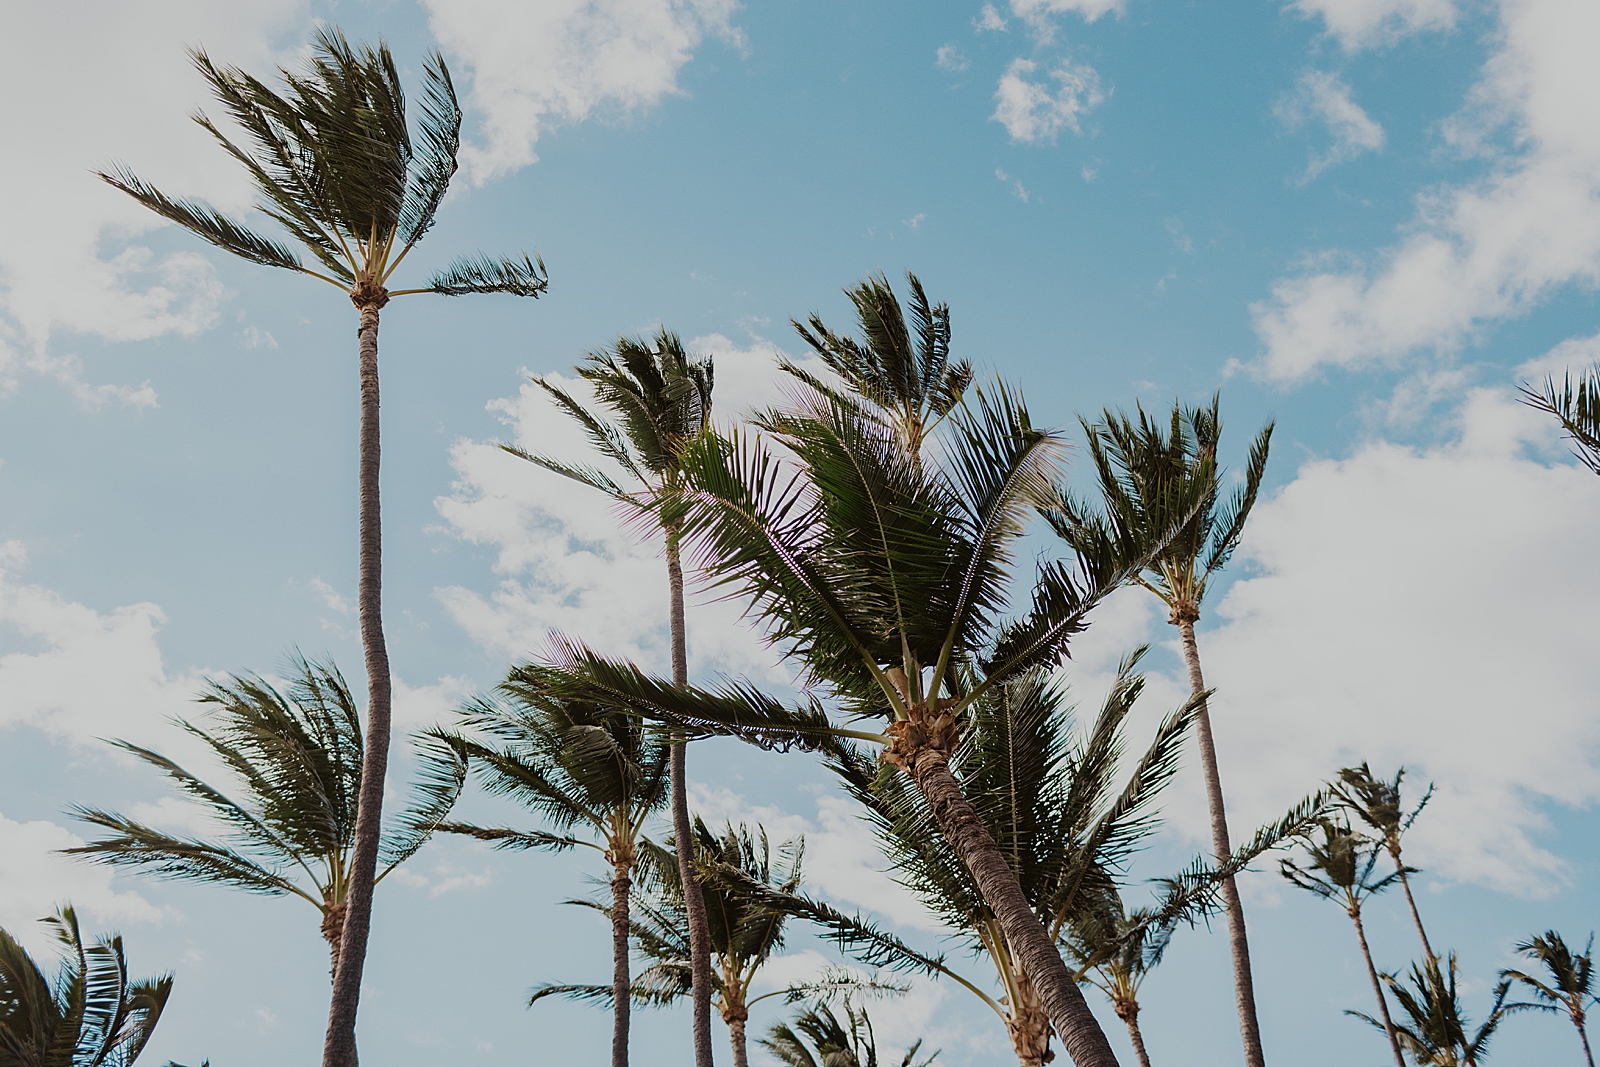 Detail shot of palm trees with bright blue sky and clouds